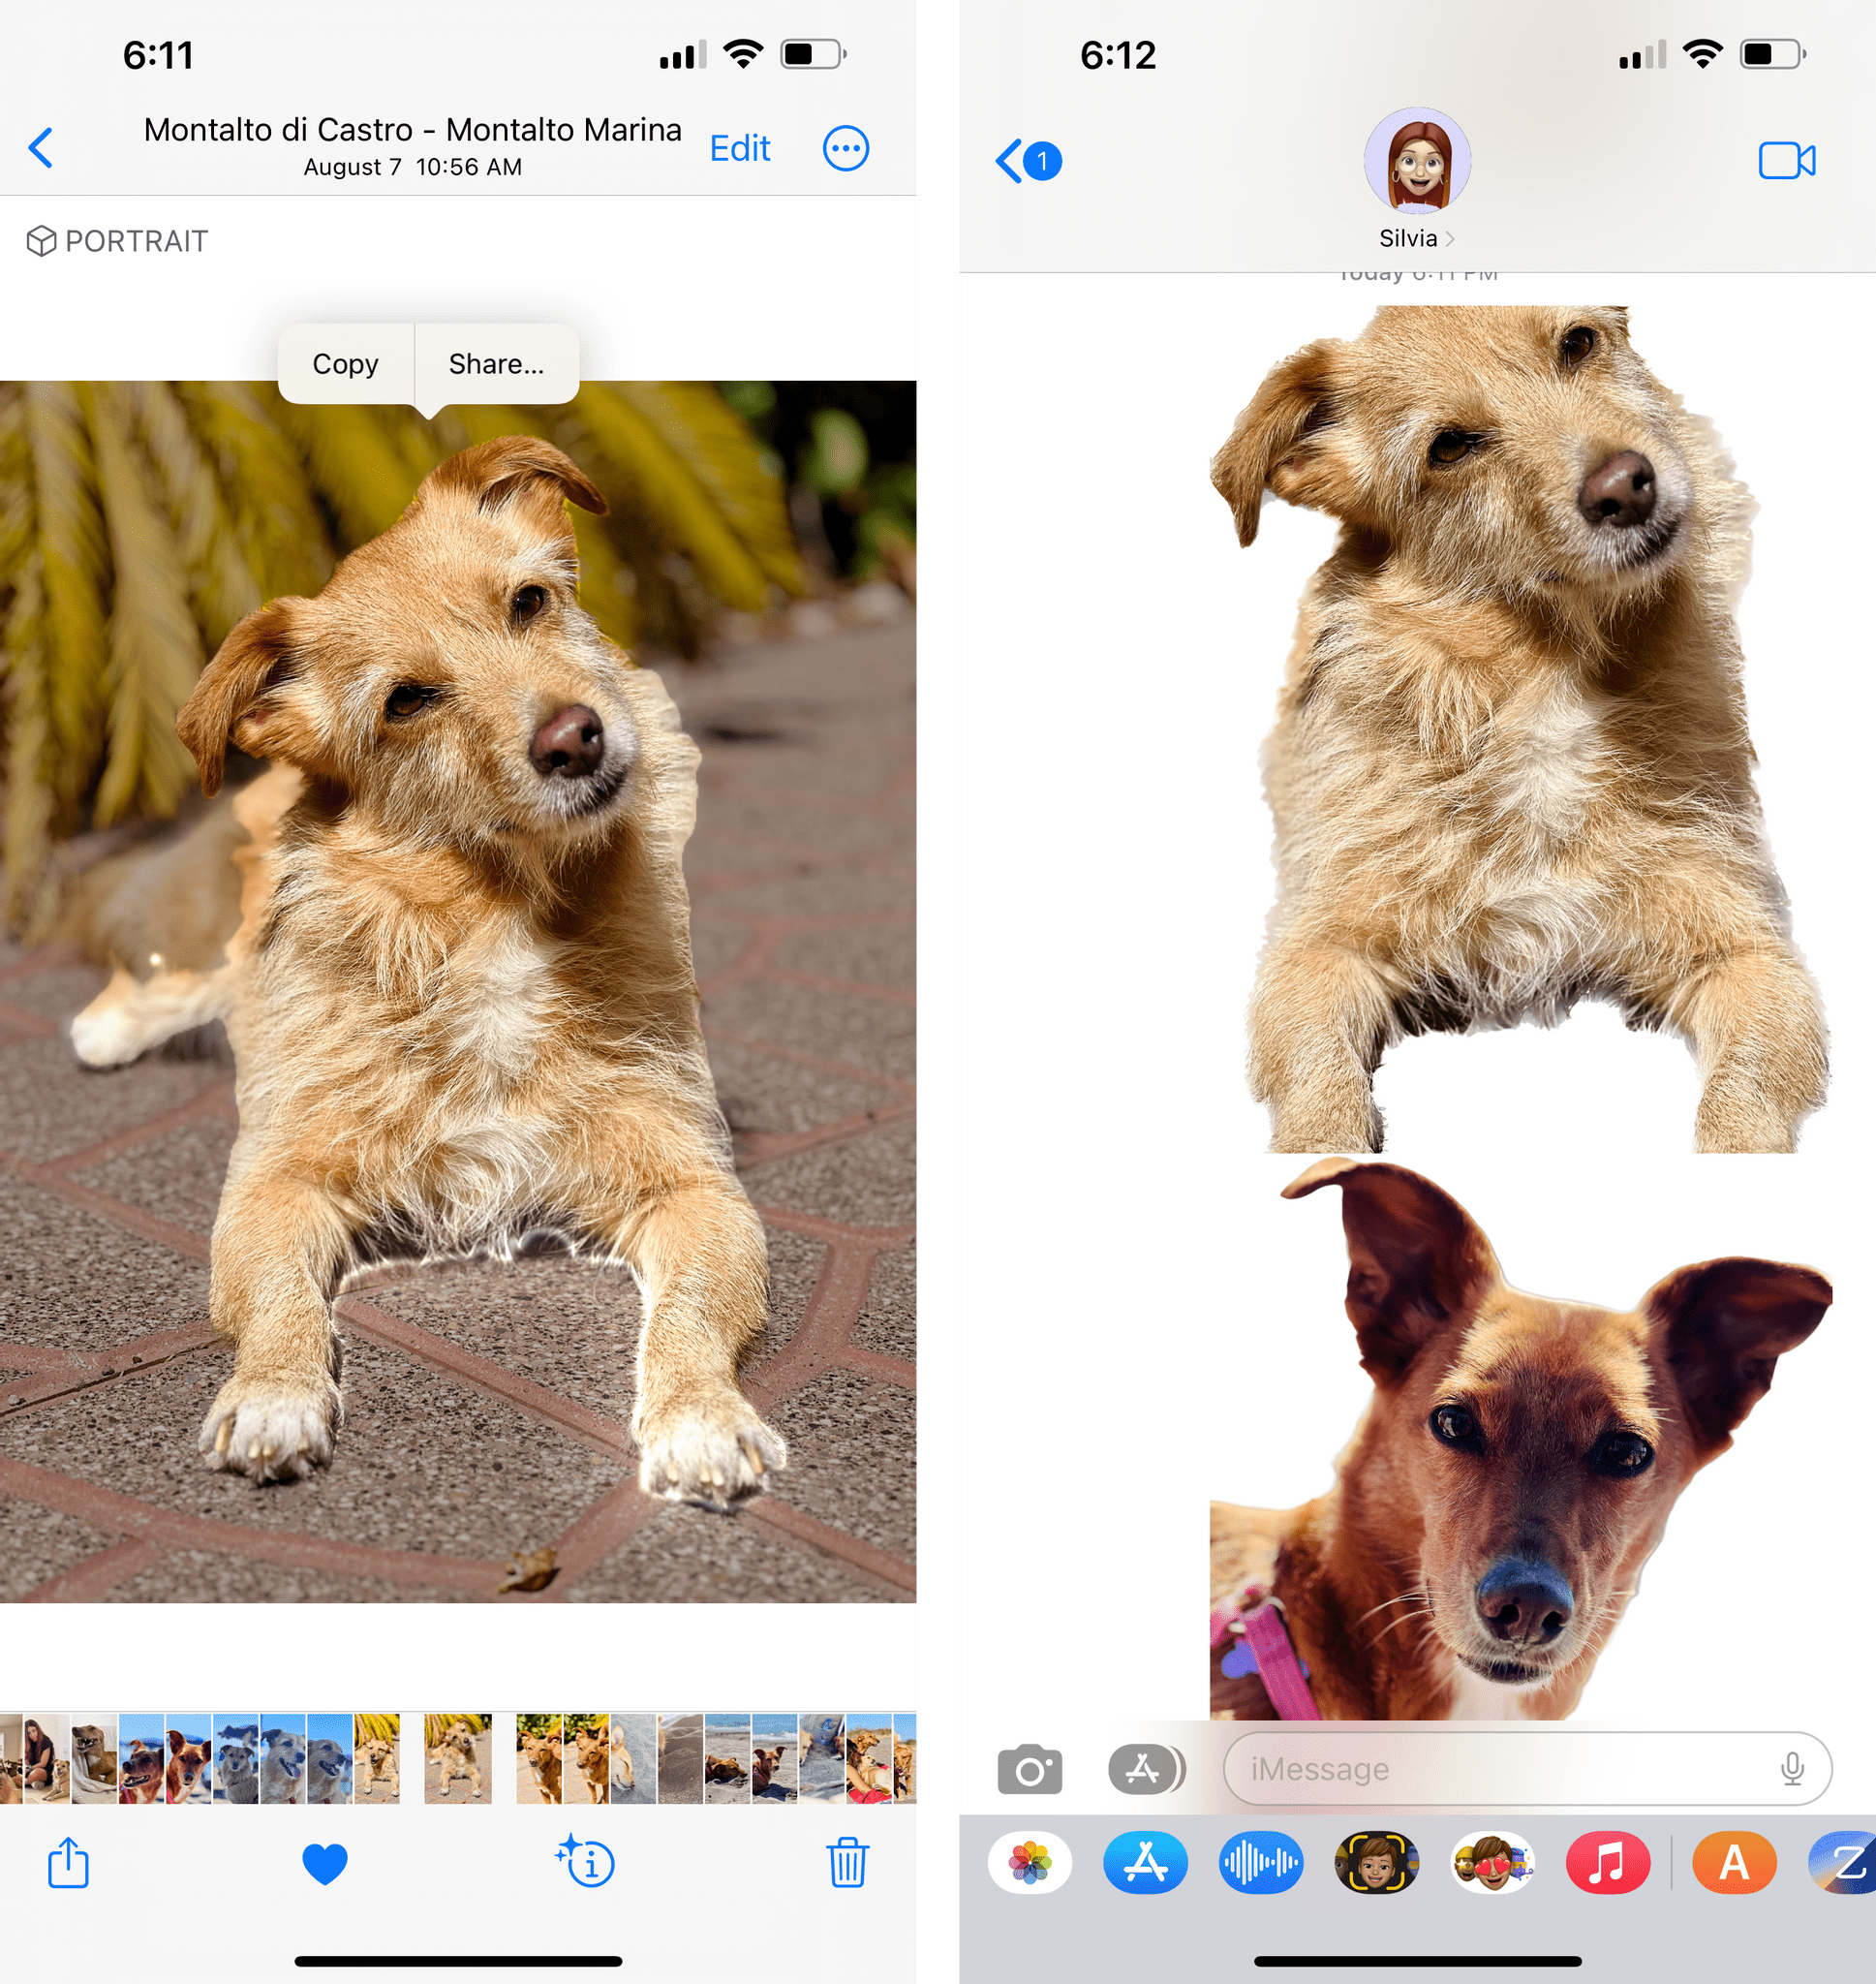 Dog PNGs thanks to Photos in iOS 16.